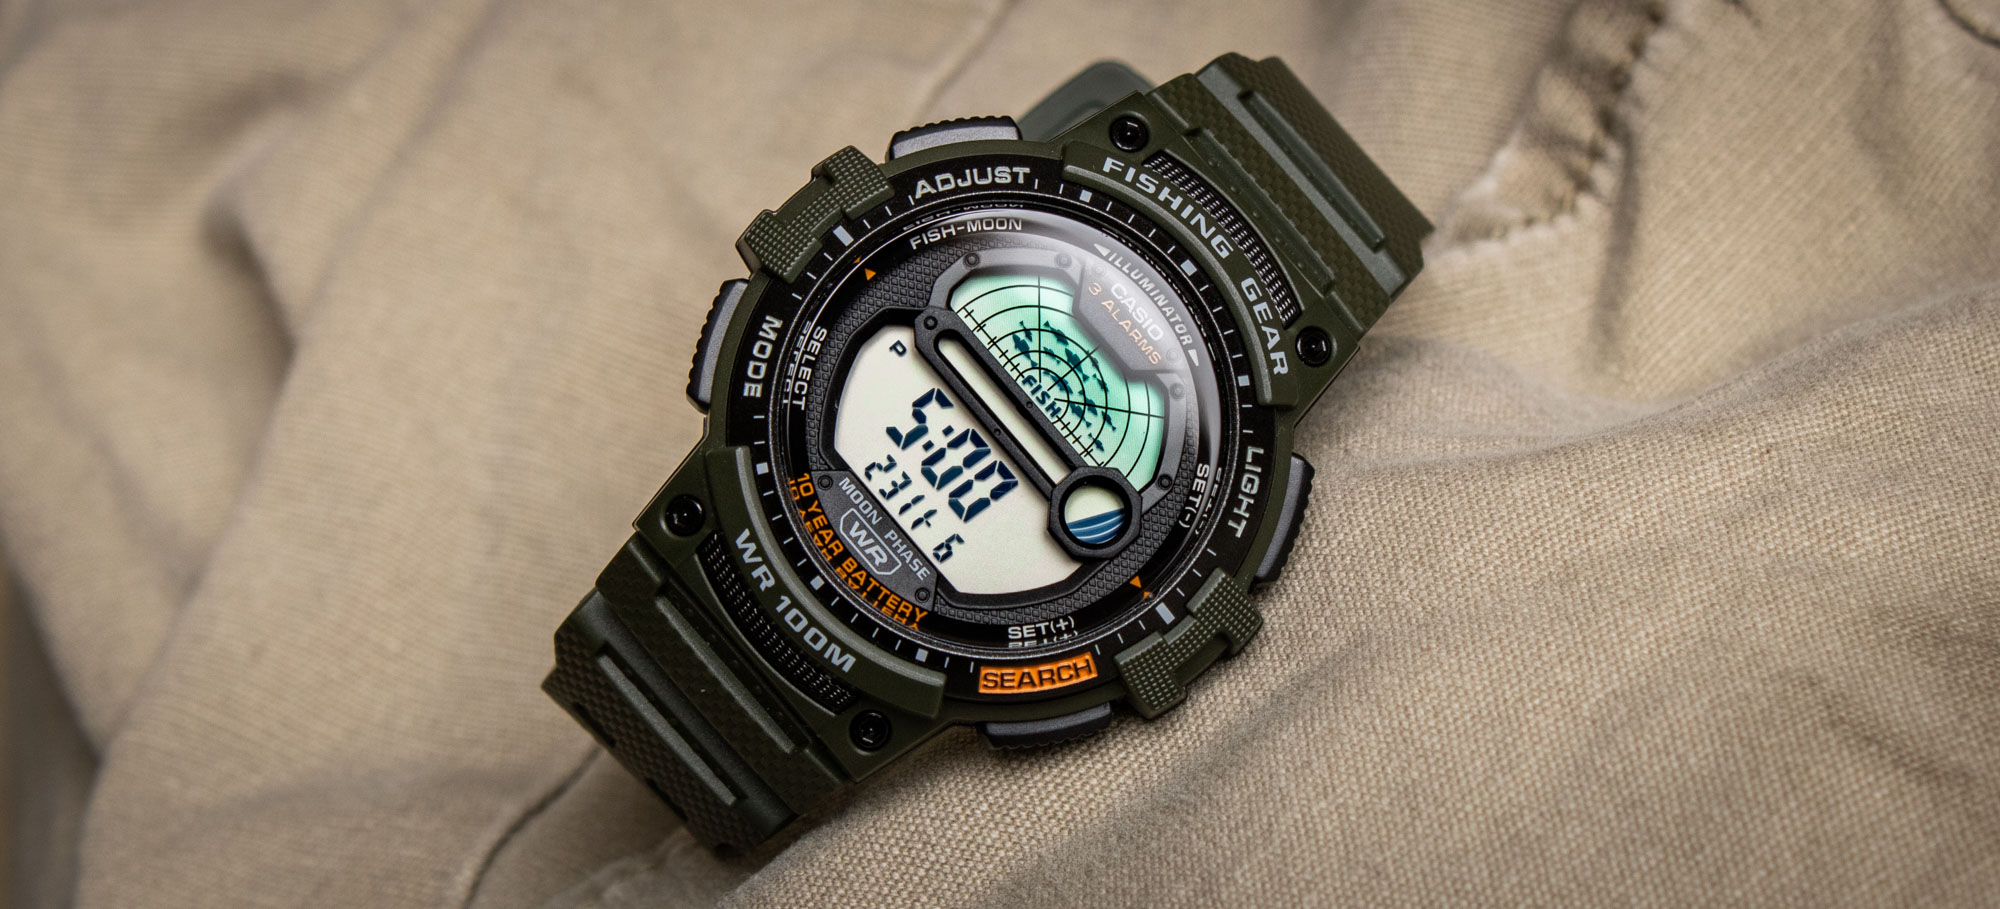 Casio Fishing Gear Review (WS-1200h) - So Many Functions for $21